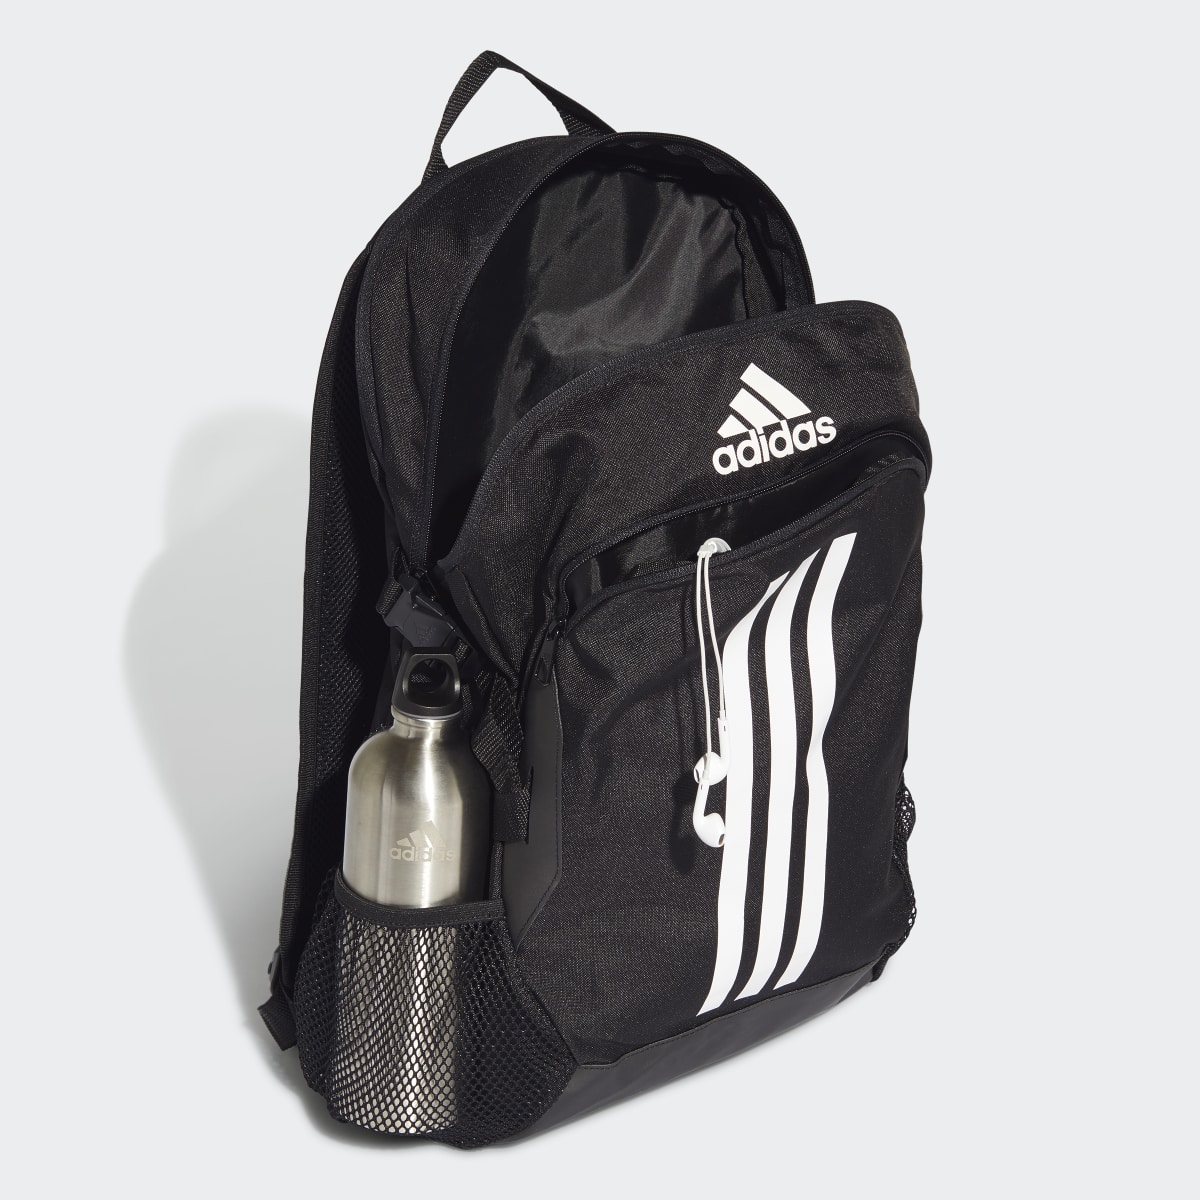 Adidas Power 5 Backpack. 5